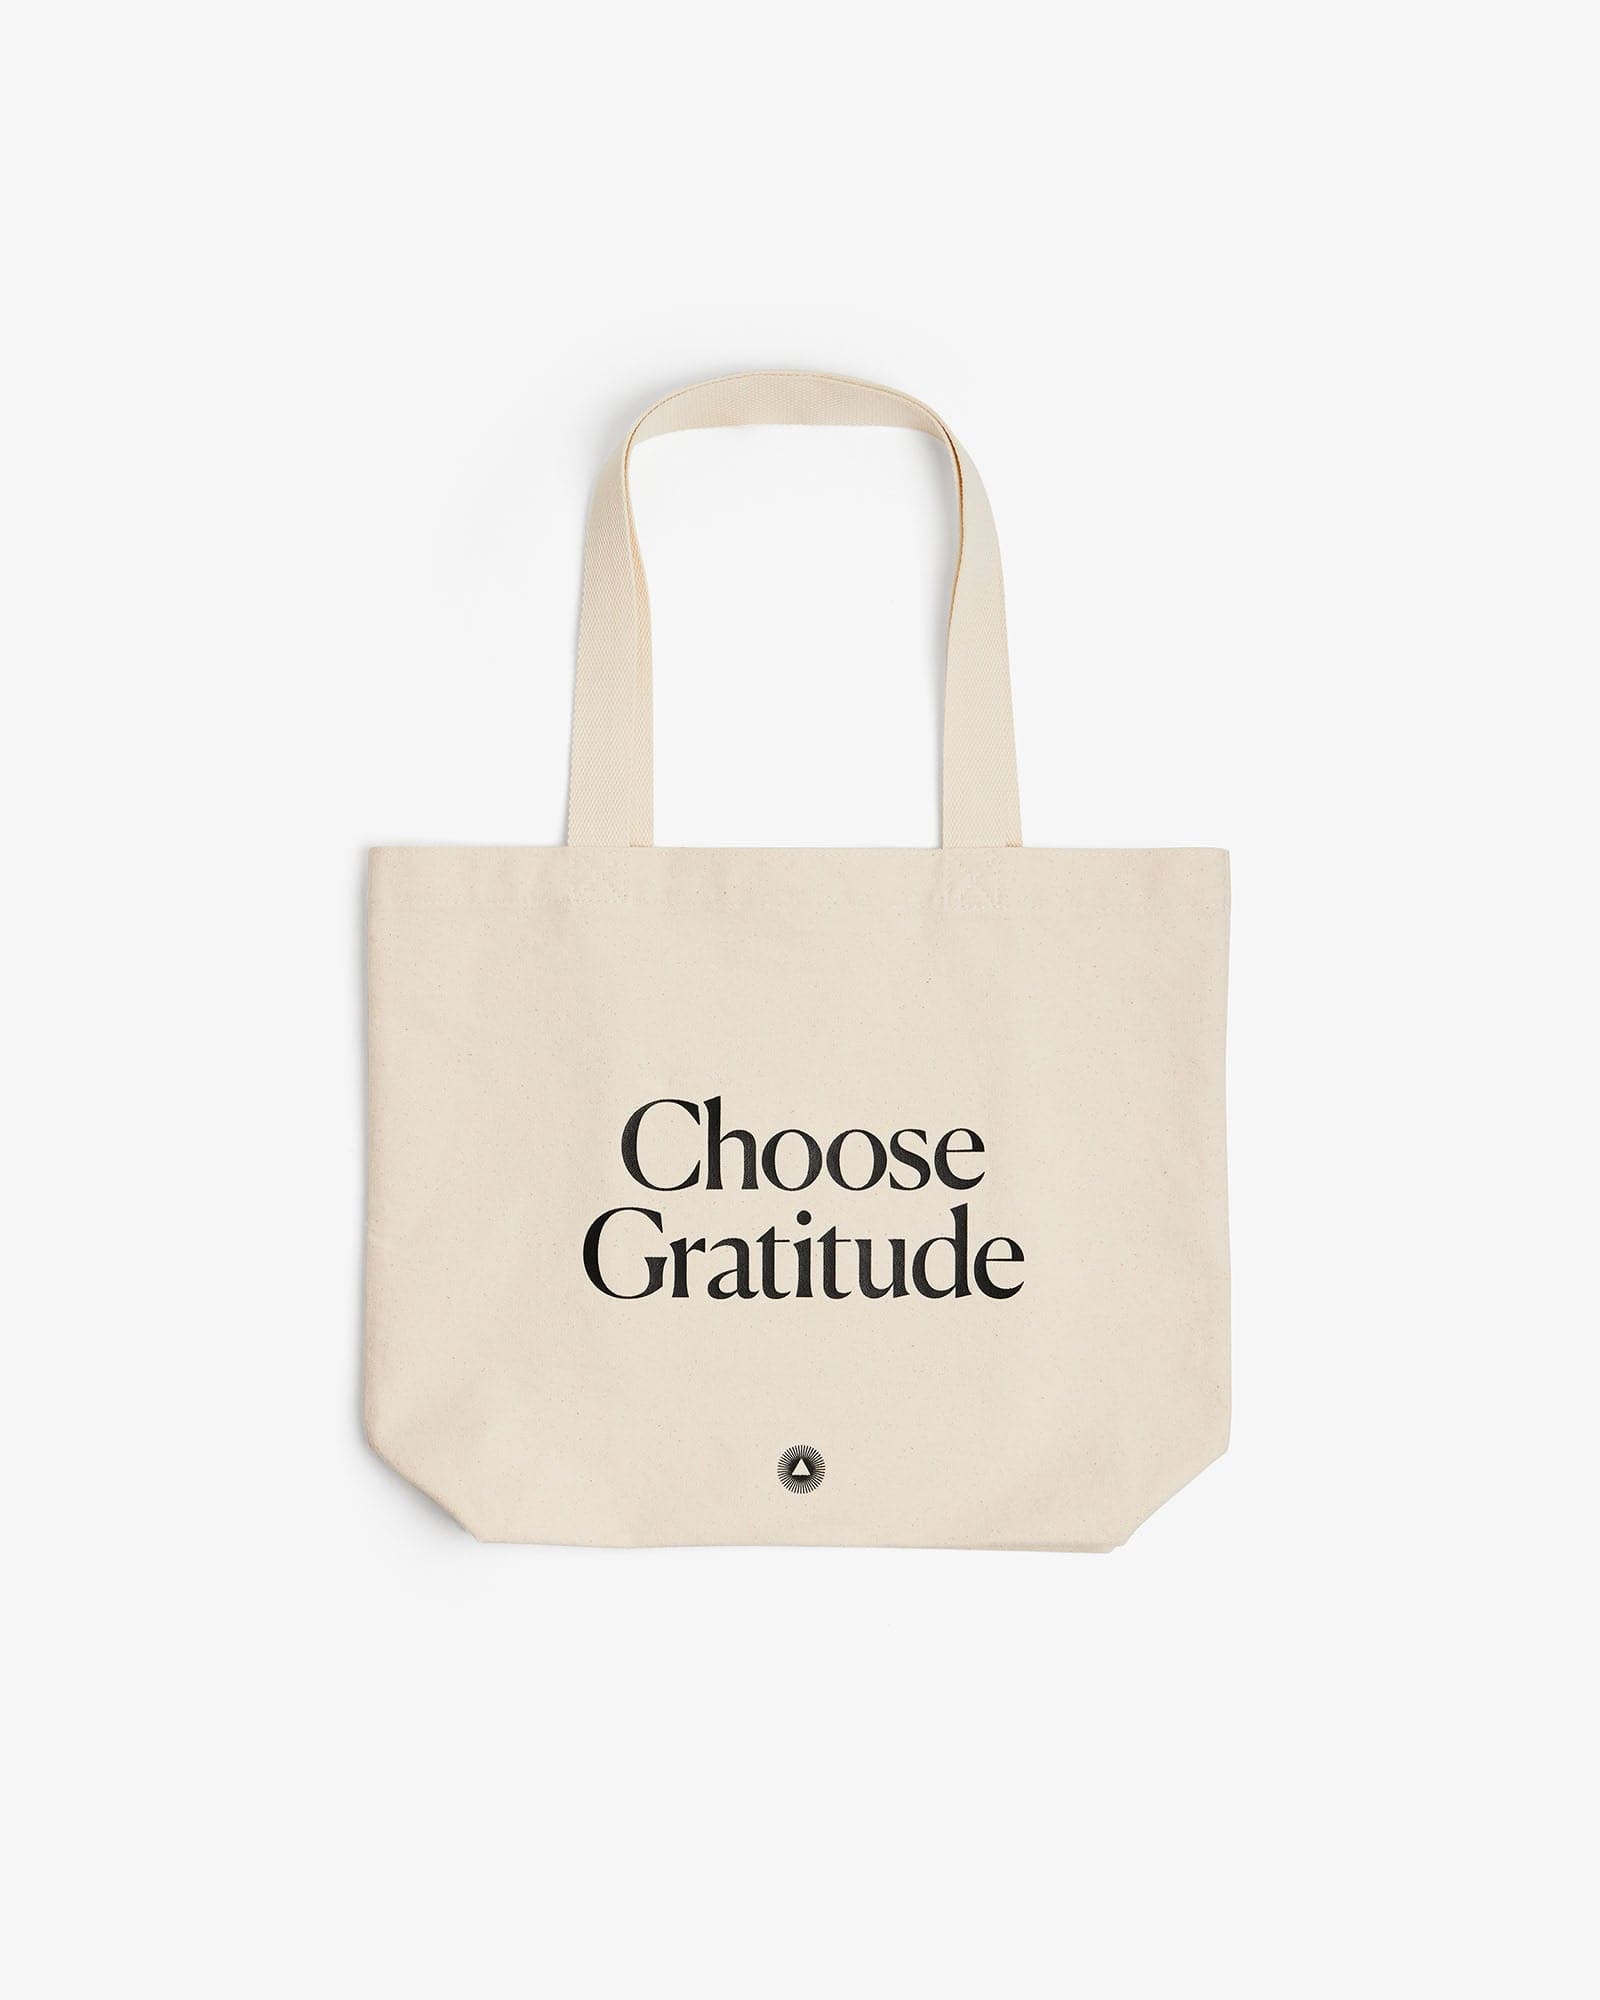 Tote Bag - Buy Latest Tote Bags & Canvas Tote Bags For Women |Nestasia